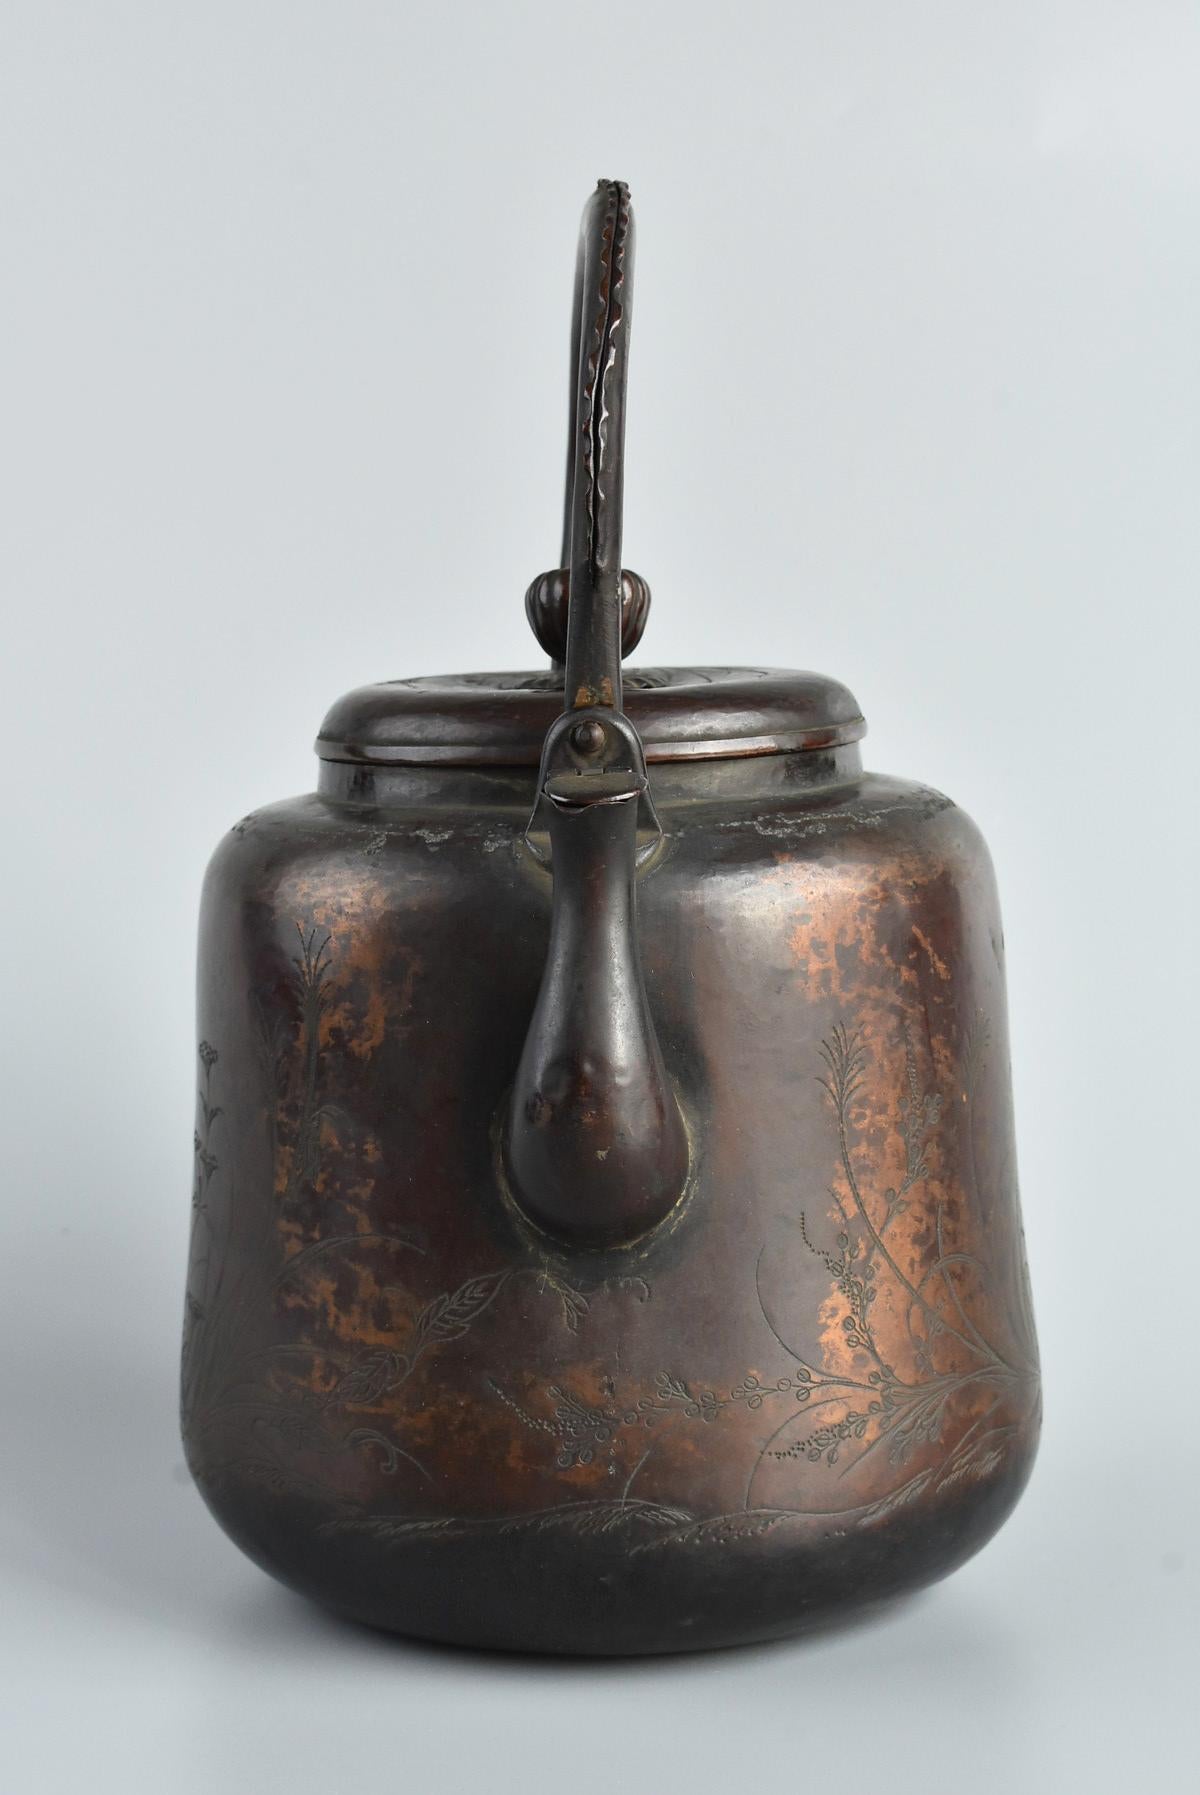 Repoussé Old Japanese Embossed Copper Kettle / Flower Engraving/19th-20th Century